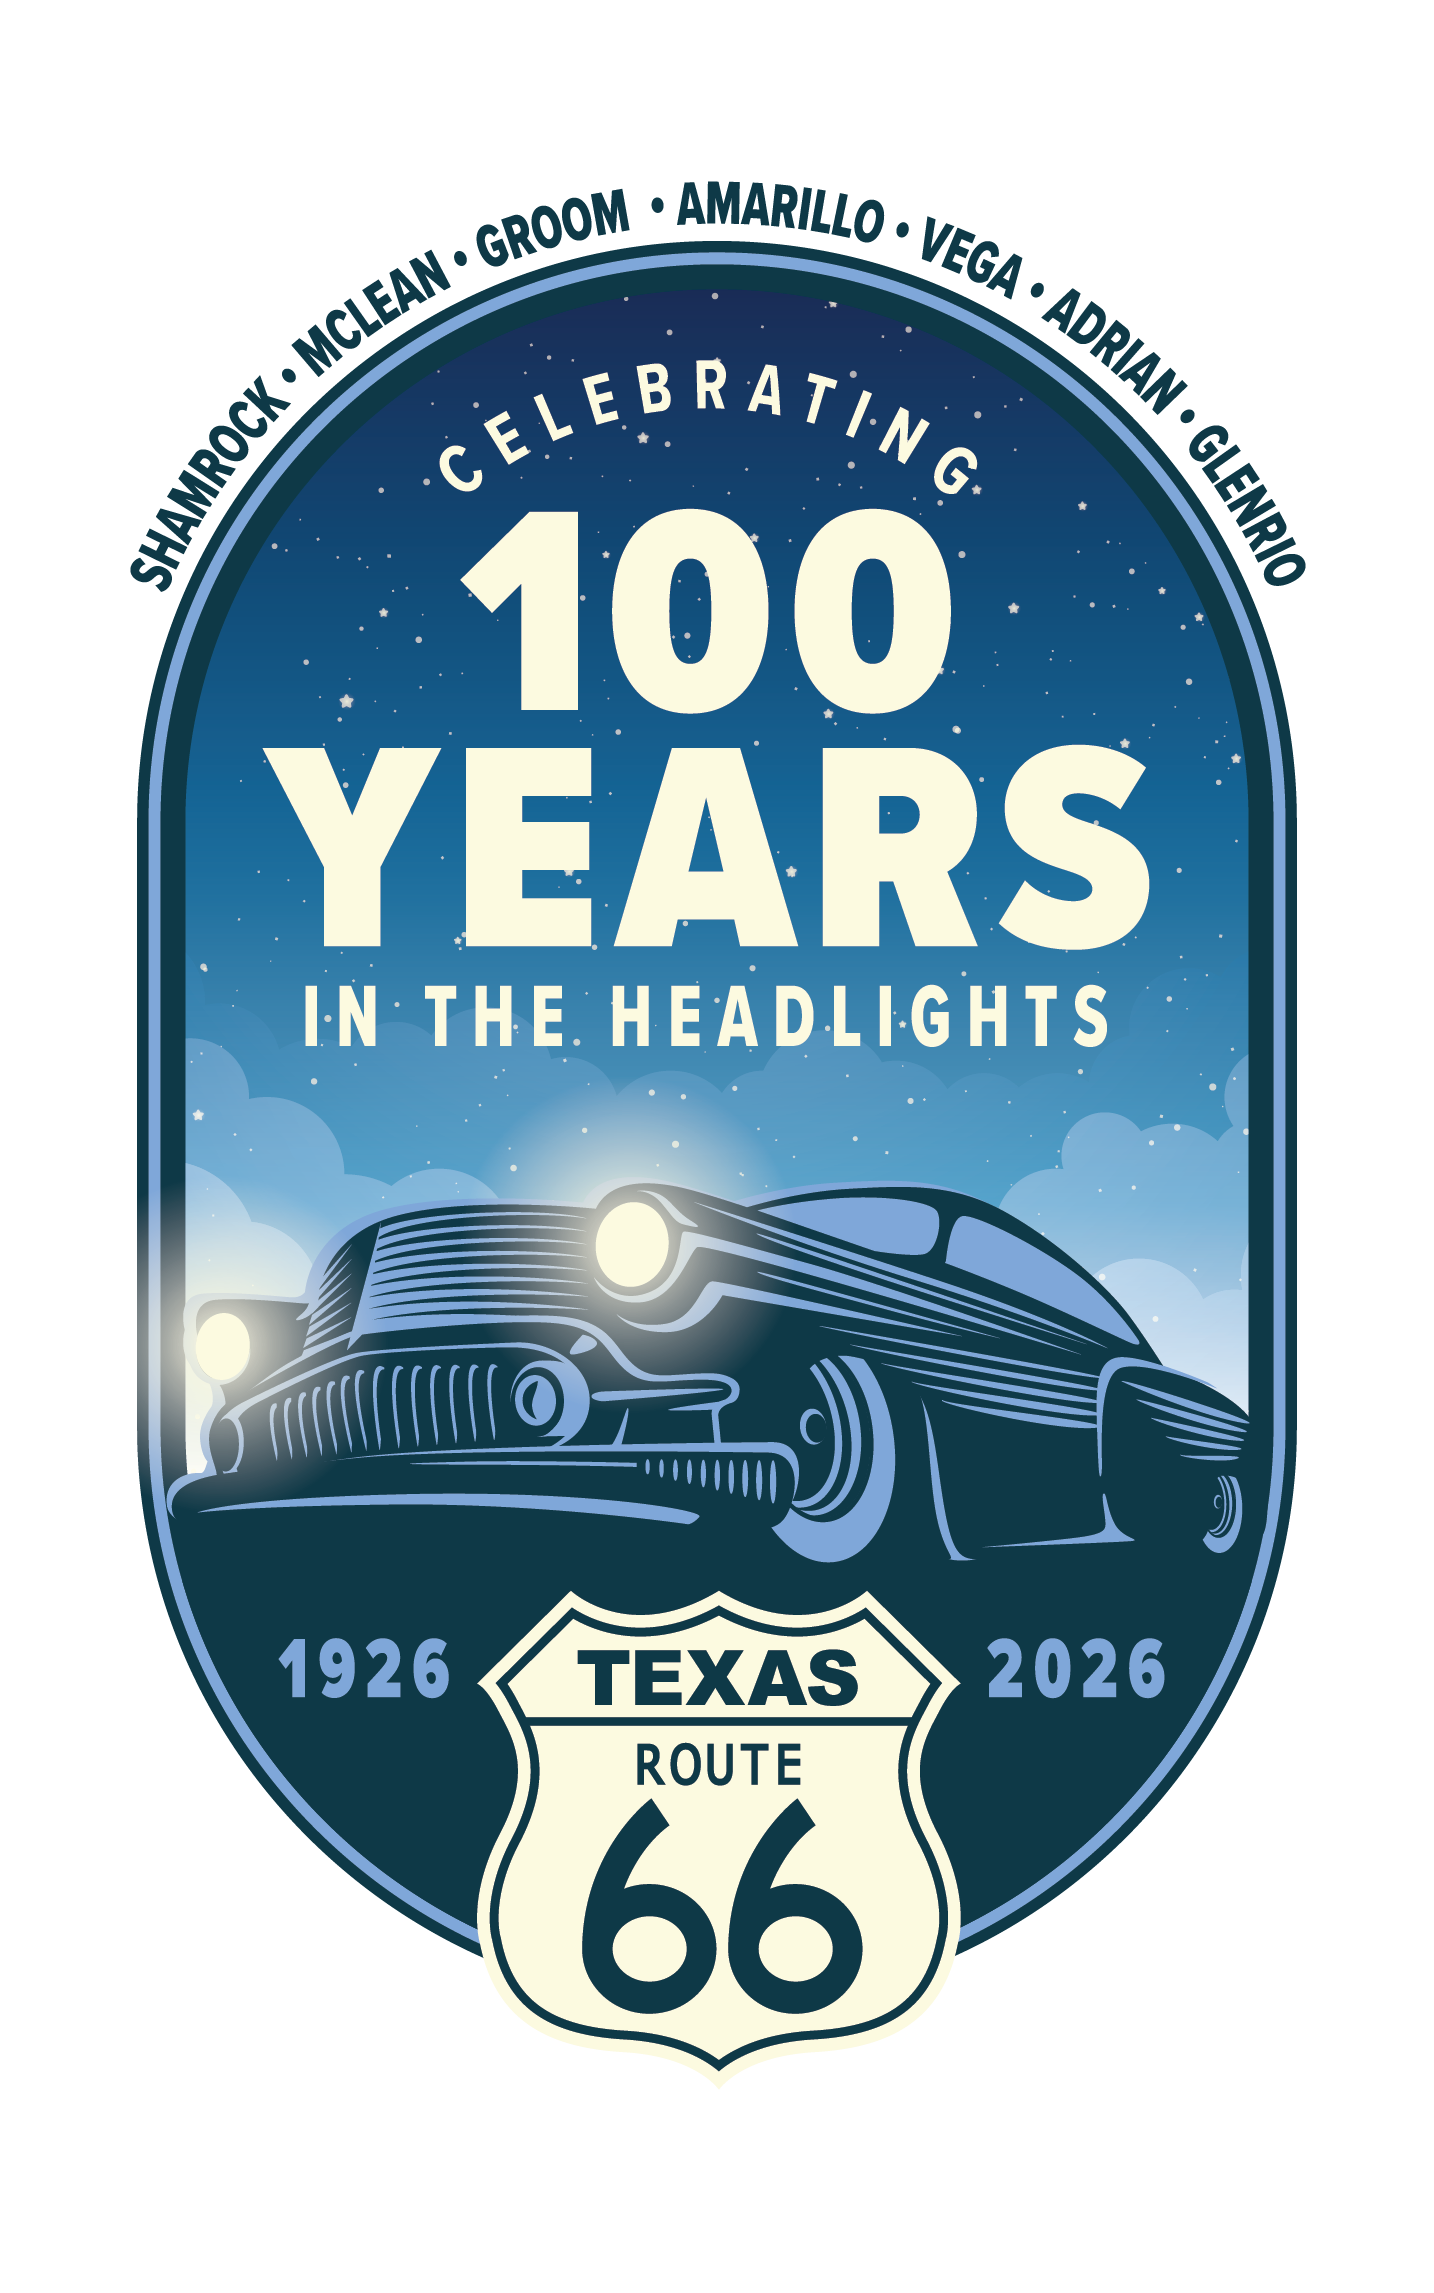 Route 66 Centennial logo reads Celebrating 100 Years in the Headlights.